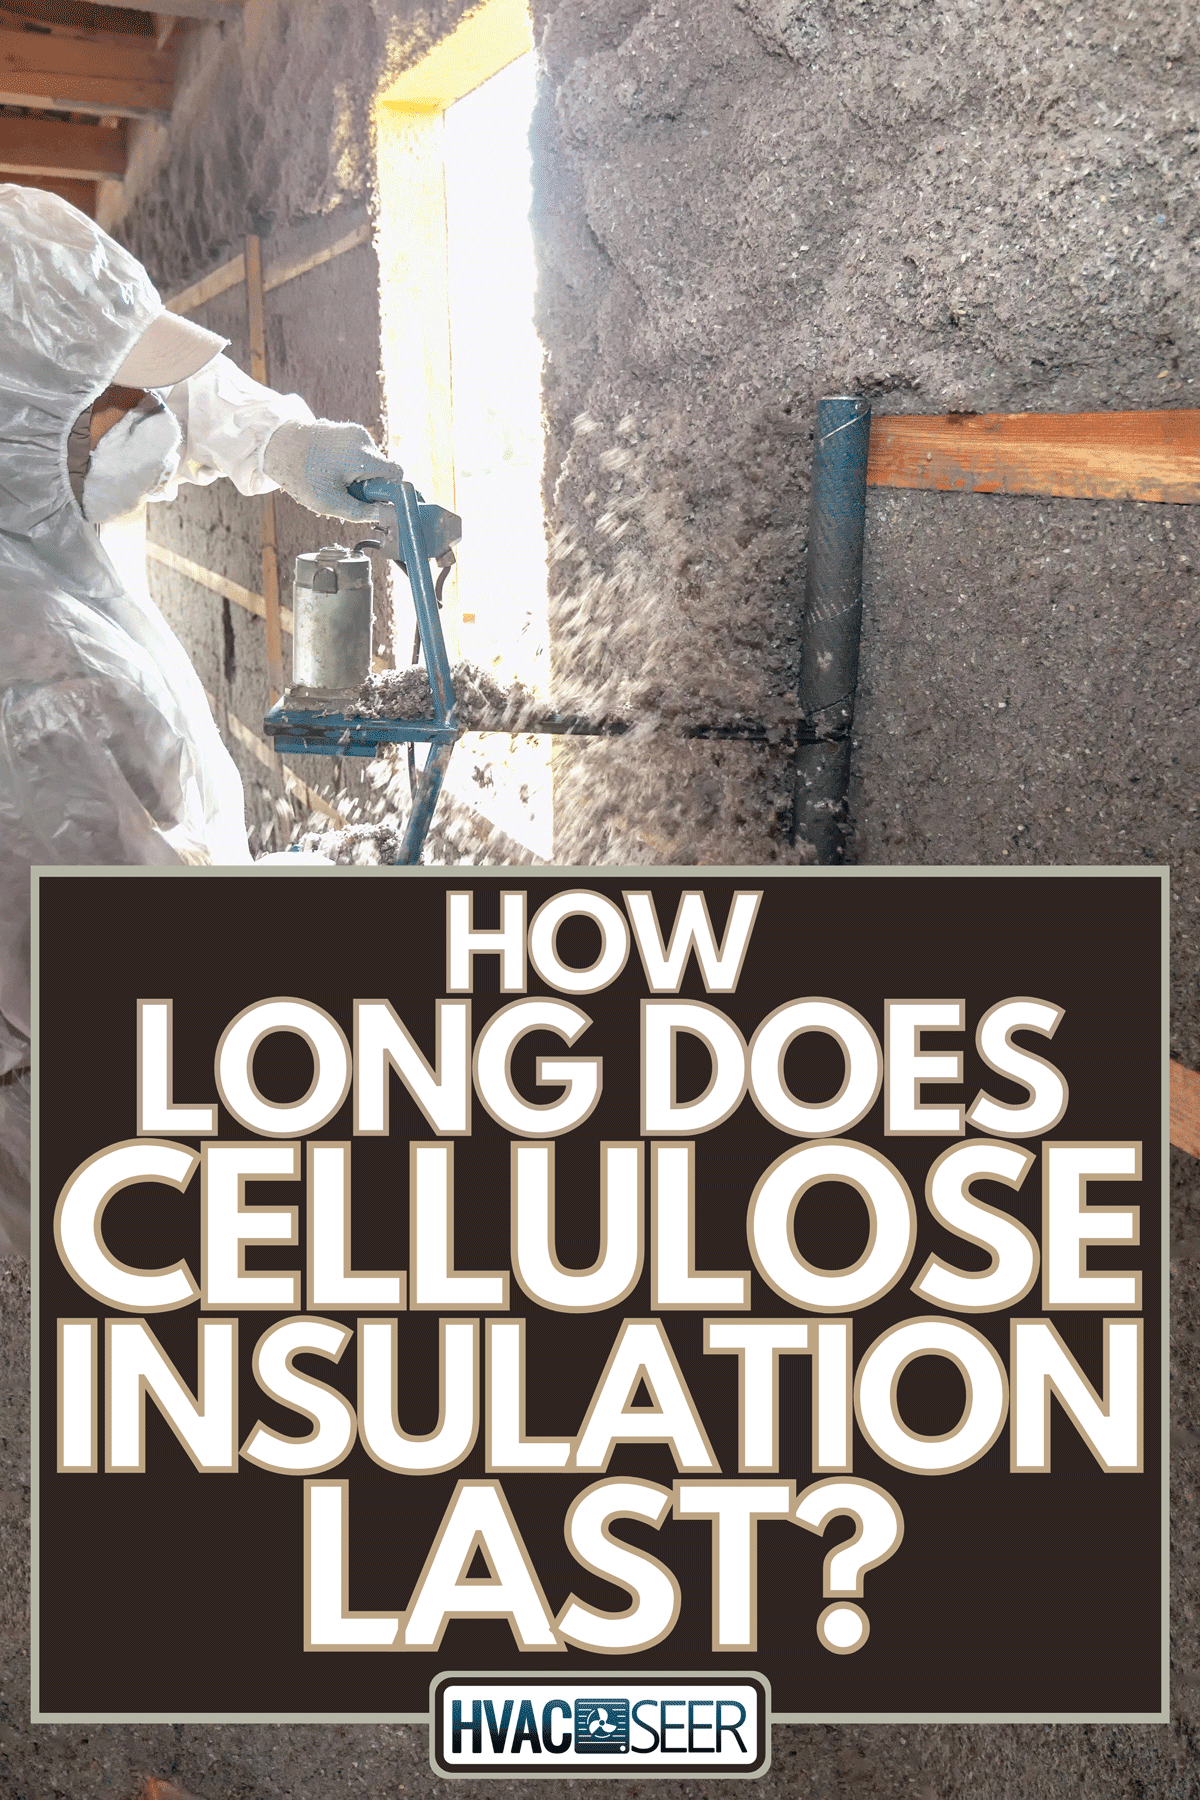 Leveling the wall after applying cellulose insulation to it, How Long Does Cellulose Insulation Last?